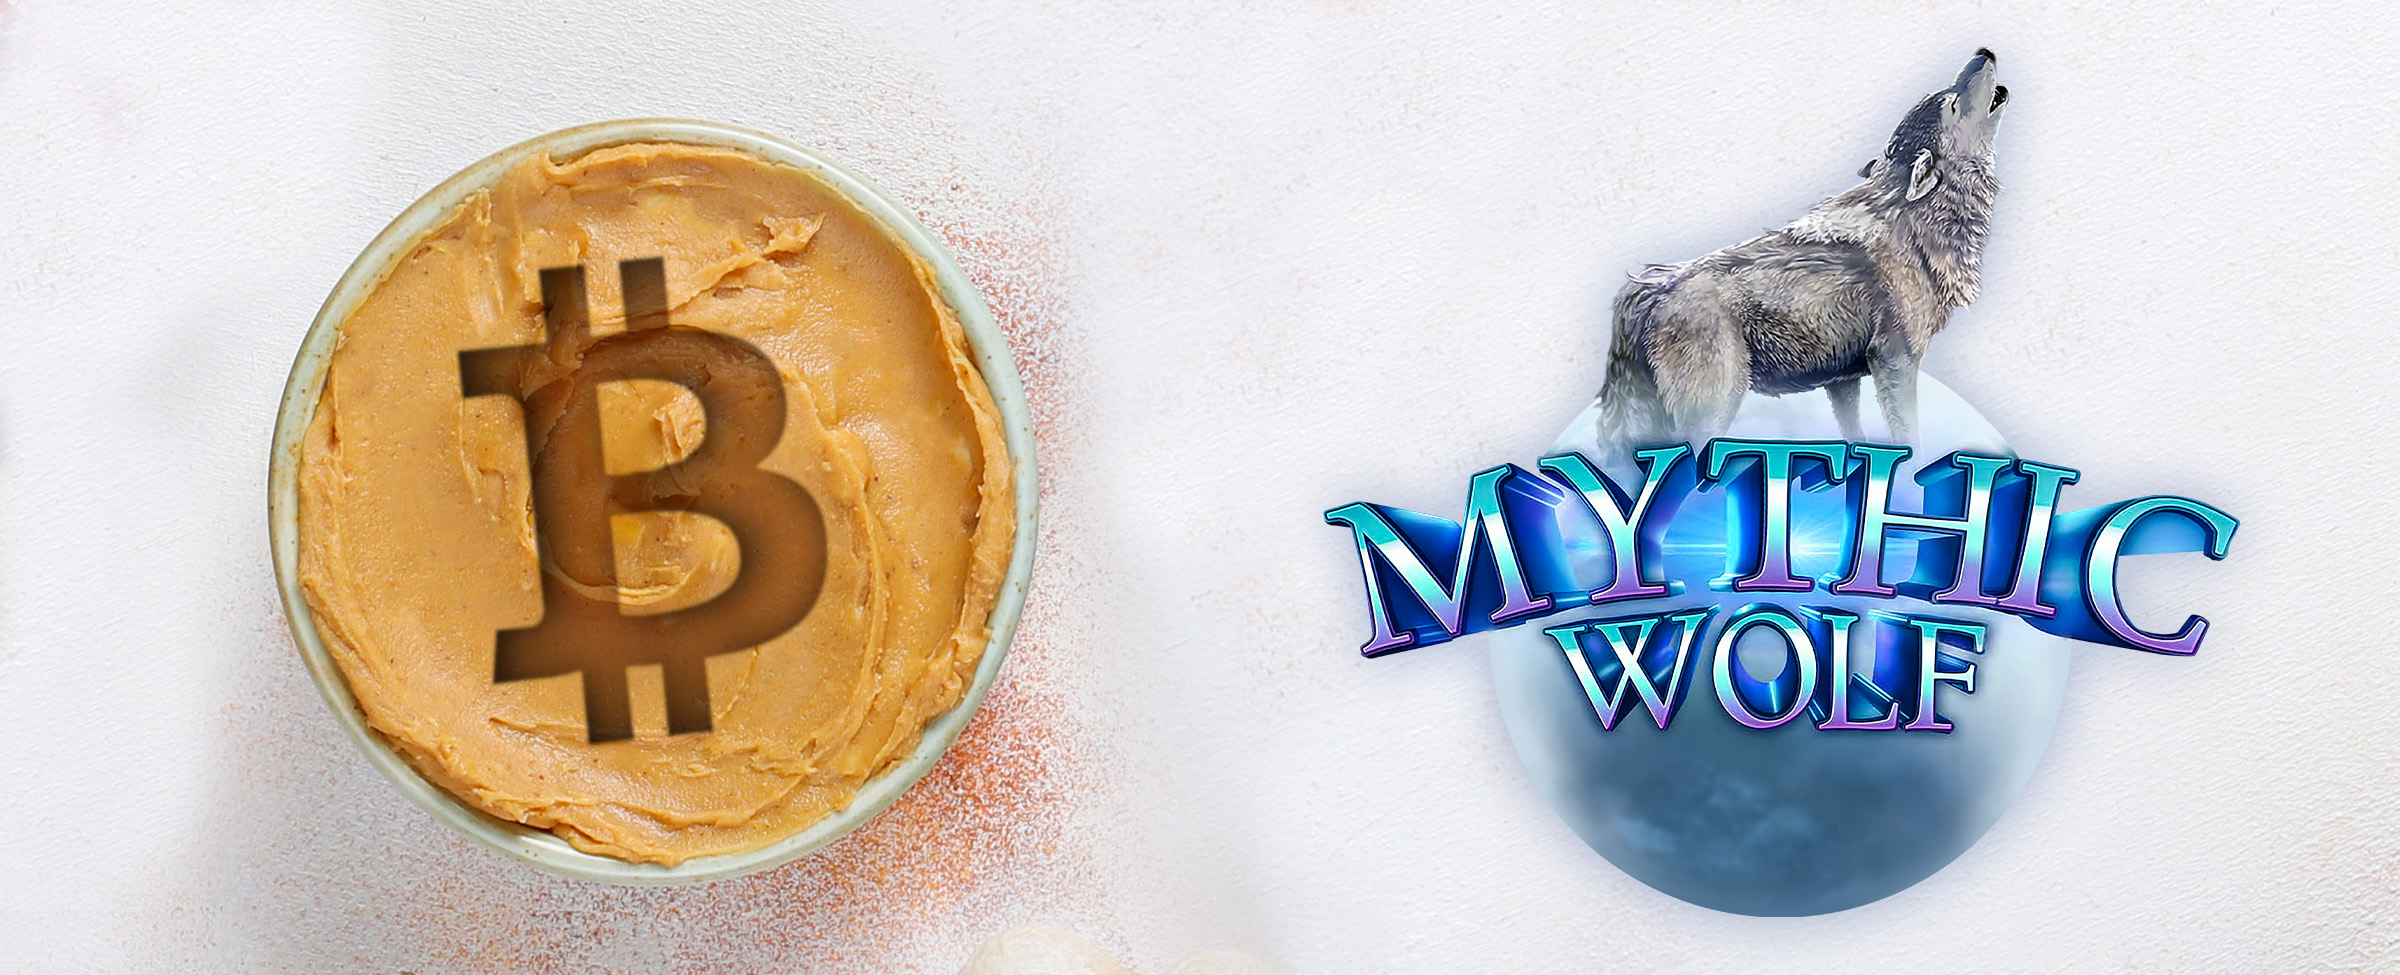 A coffee cup filled with a peanut butter latte and a dusted ‘B’ from the bitcoin logo sits atop an off-white table surface. To the right is the main logo from the Cafe Casino slot game, Mythic Wolf, which is depicted by a 3D moon with a howling wolf on top, and the words from the game’s name written across the moon.